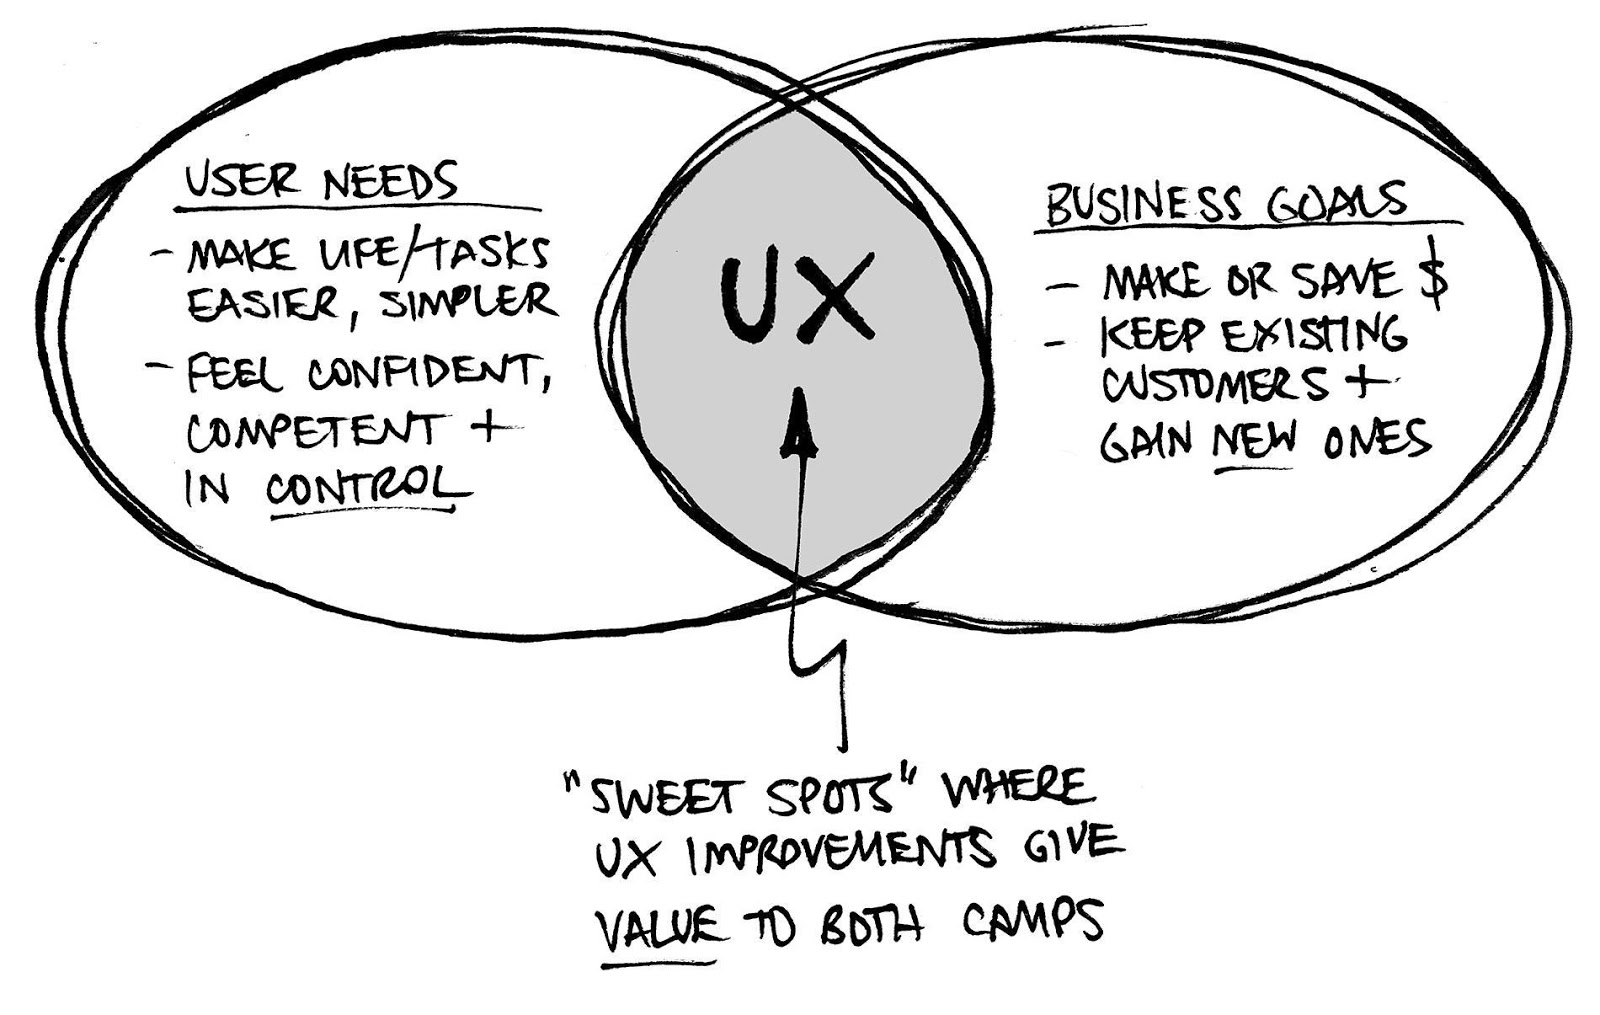 Designers need to find a sweet spot between business goals and user needs.